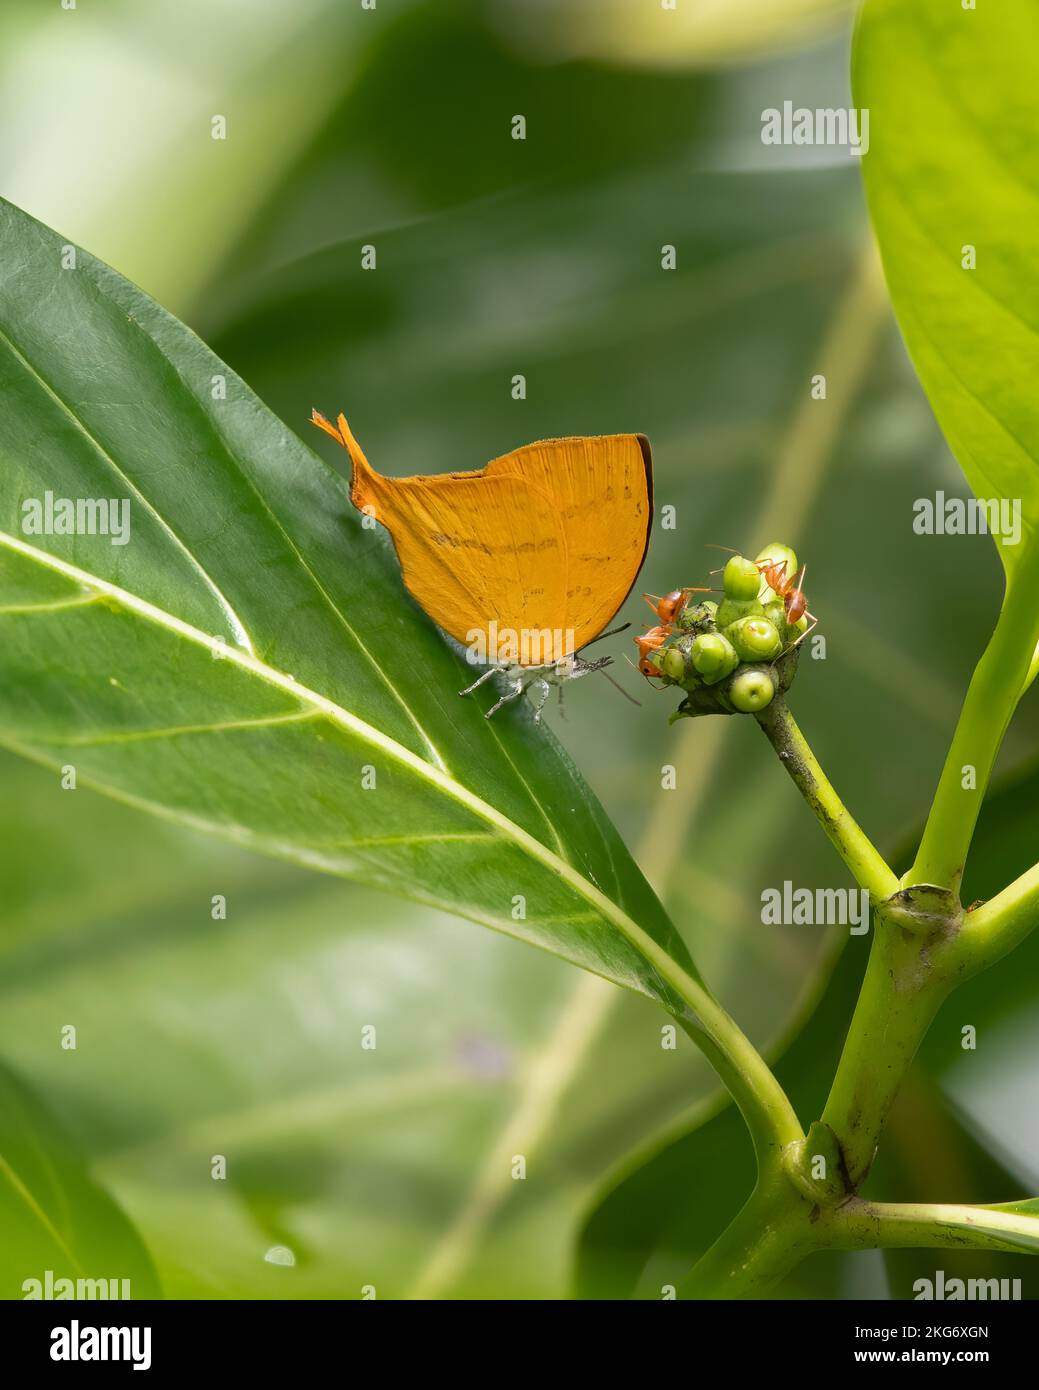 A beautiful Yamfly (Loxura atymnus) butterfly resting on a leaf in the garden at Mangalore, Karnataka in India. Stock Photo